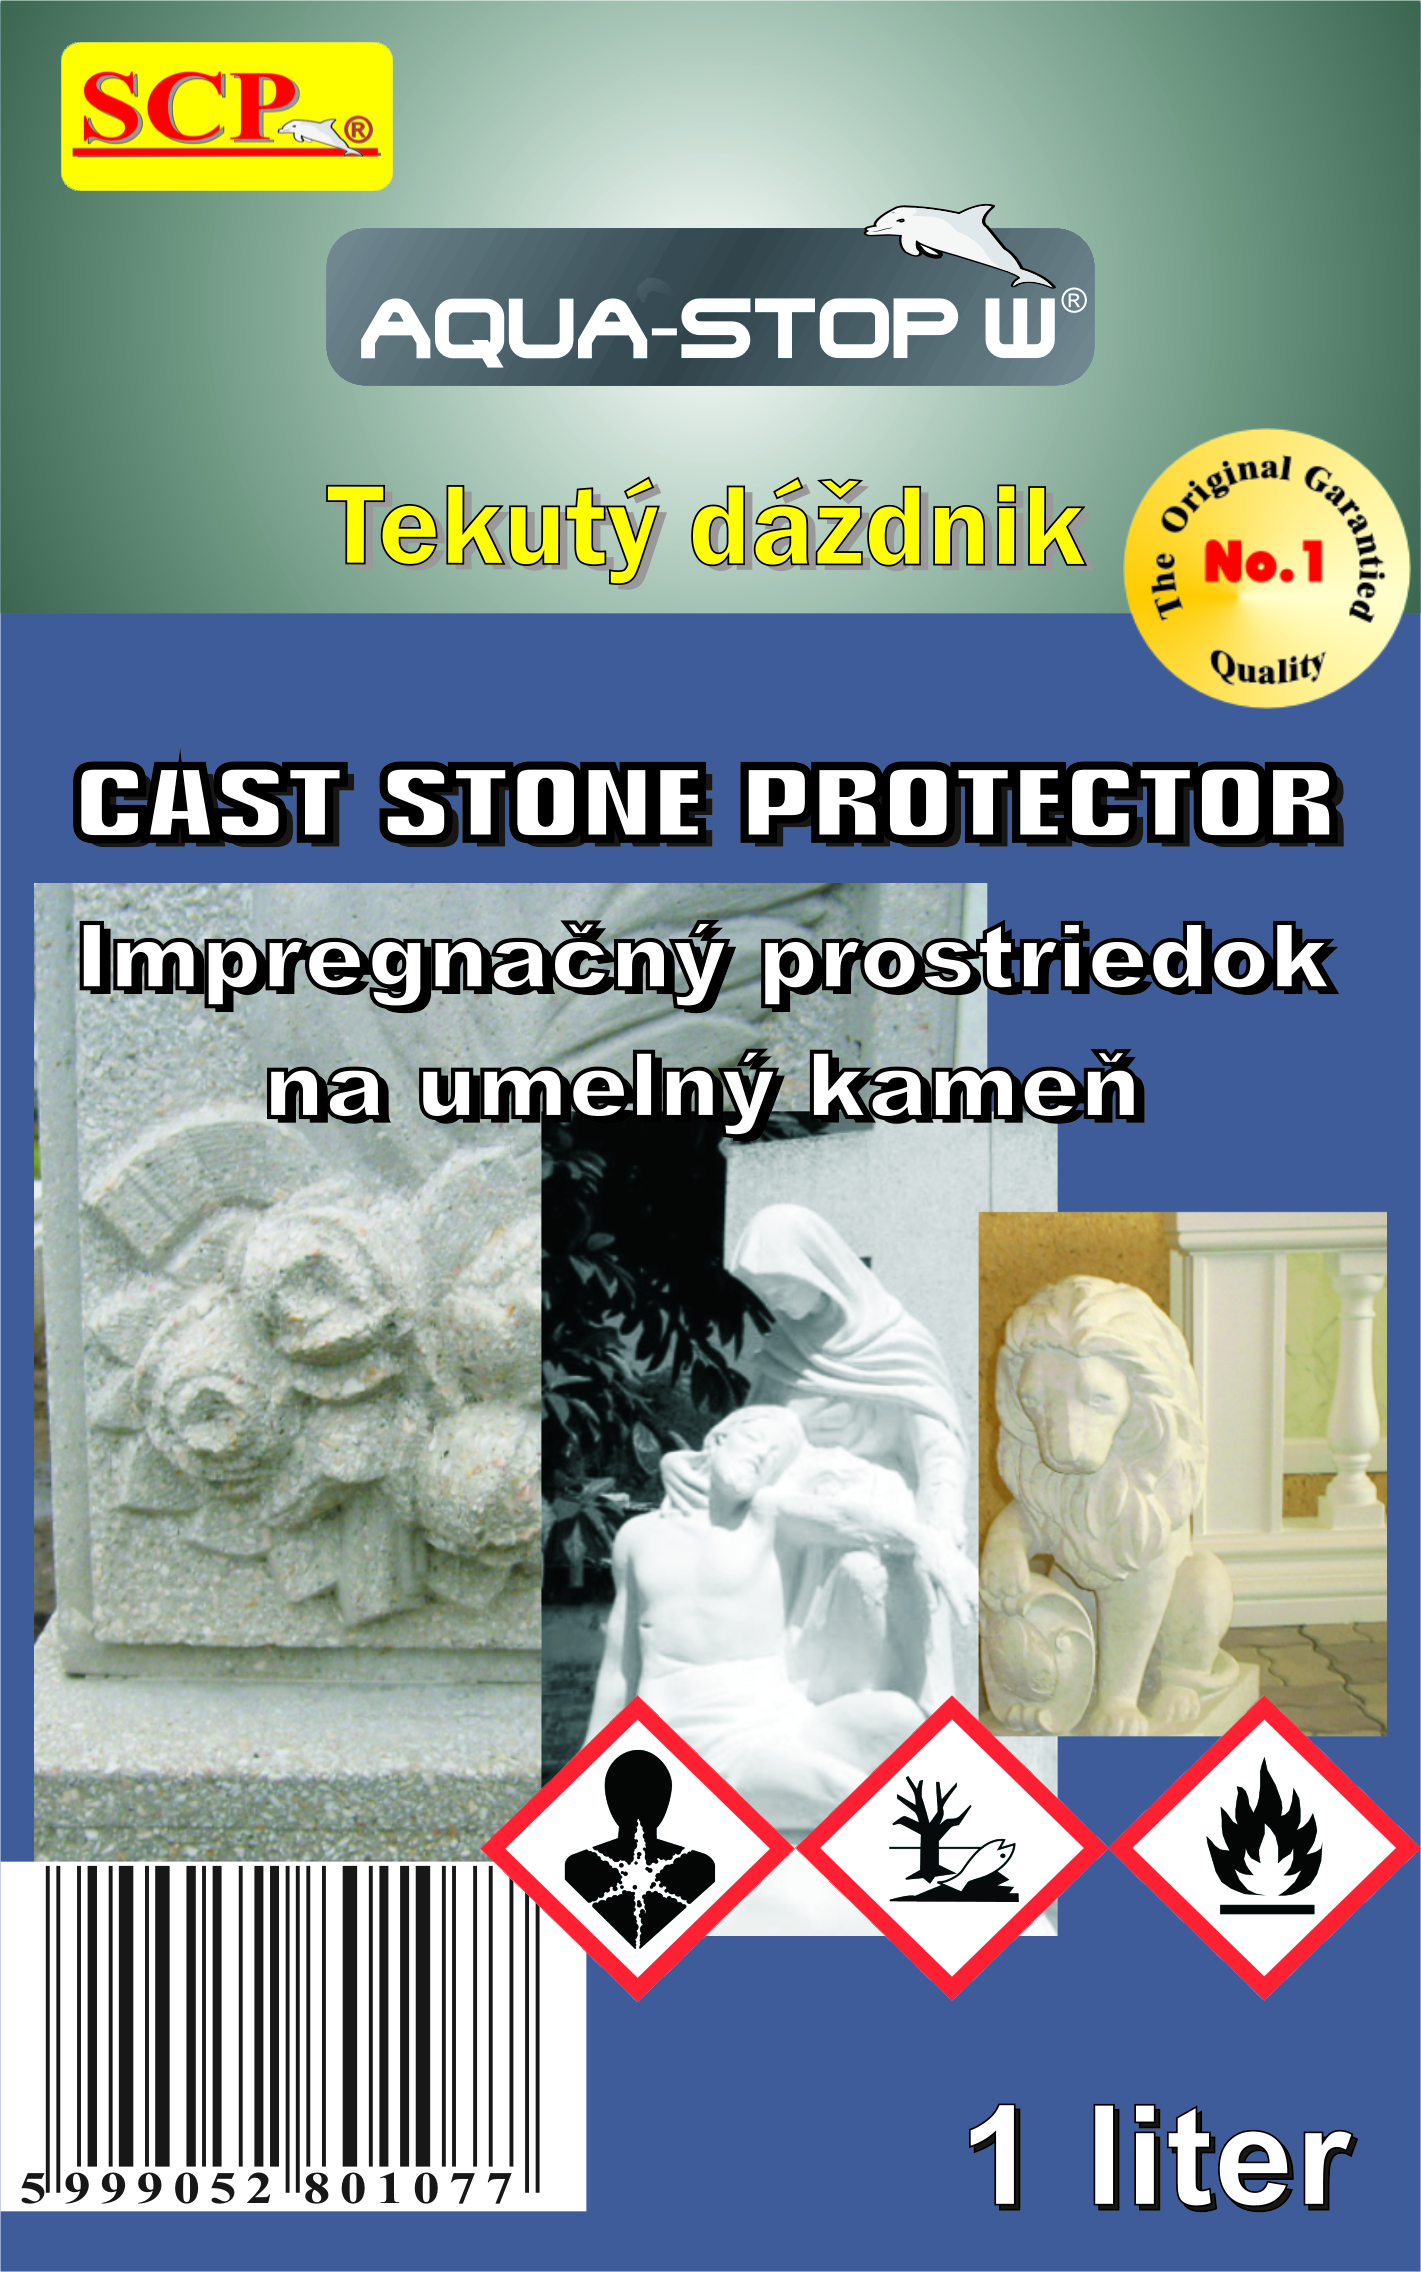 Cast Stone Protector